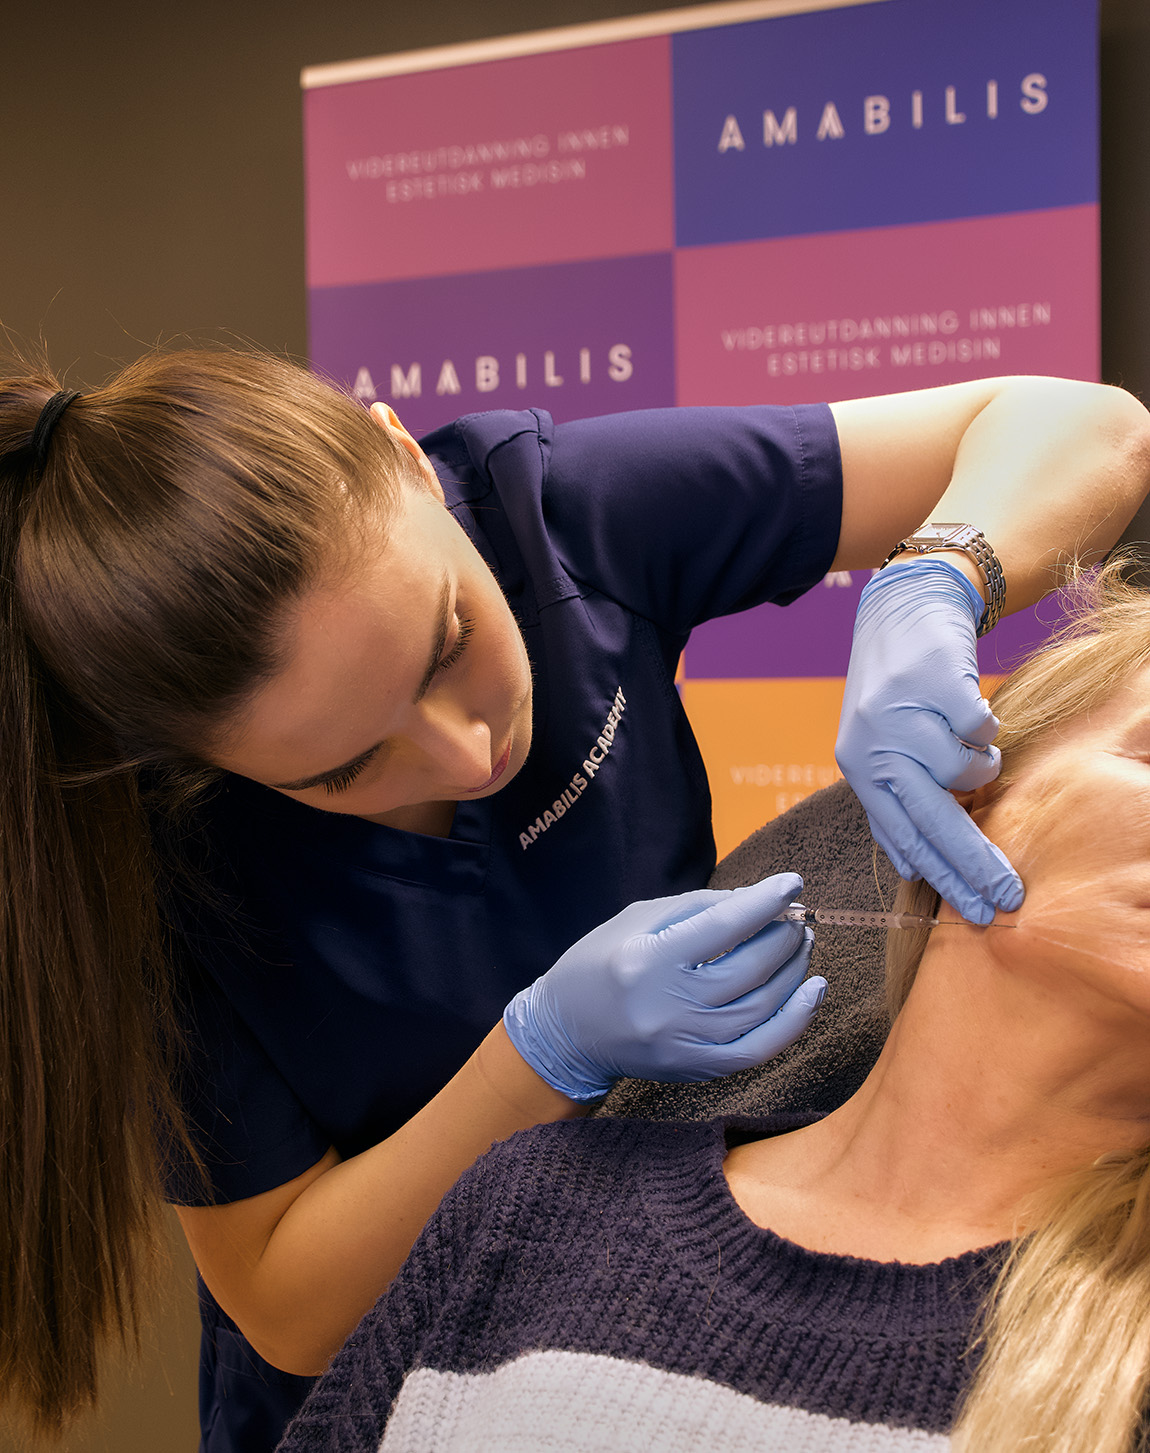 Amabilis Academy: Challenging the low standards of aesthetic medicine training